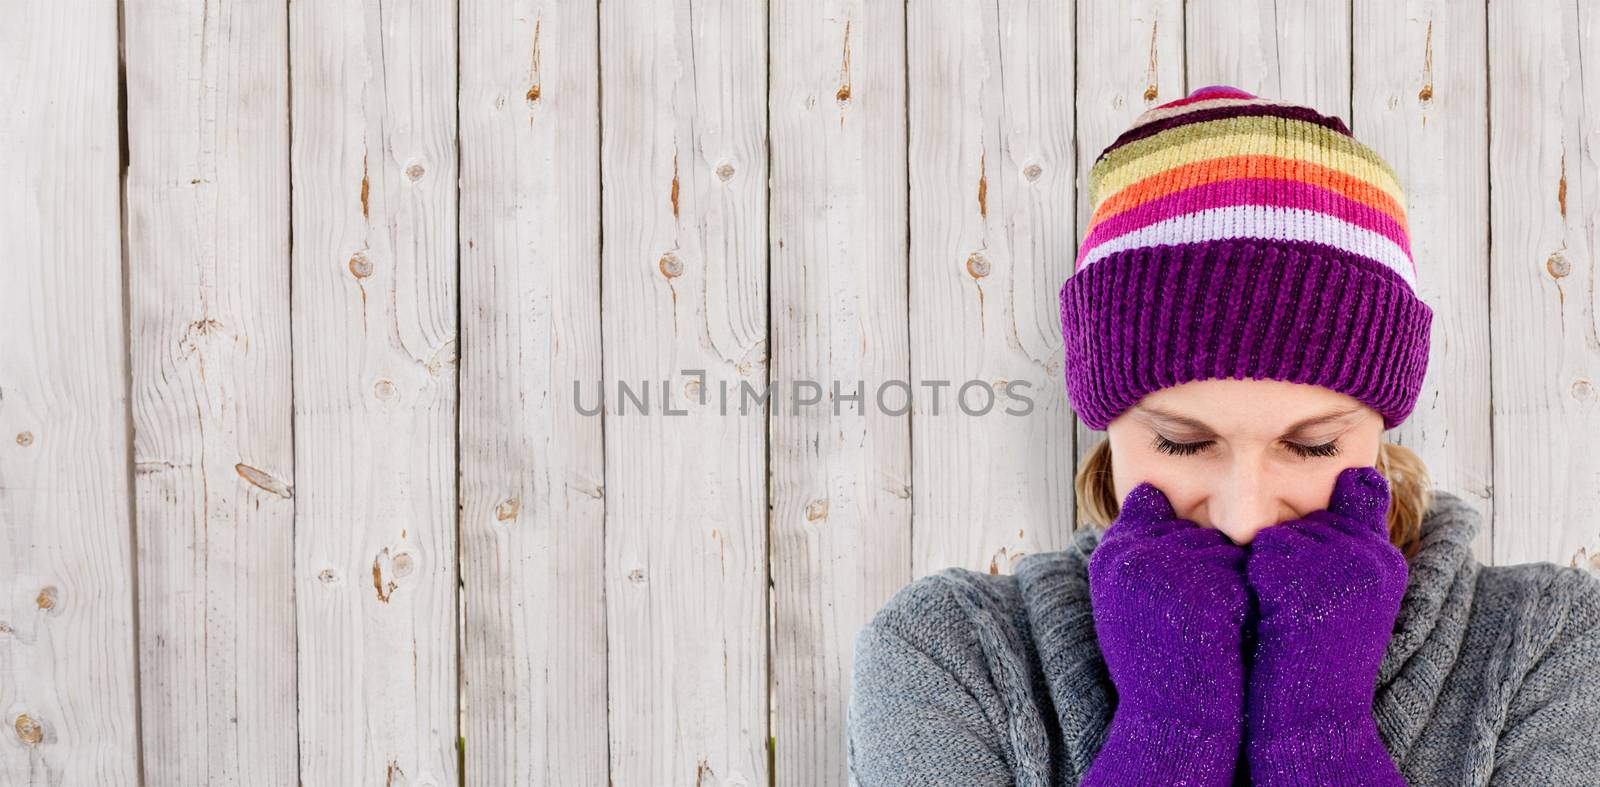 Freeze woman with gloves and a hat against wooden background